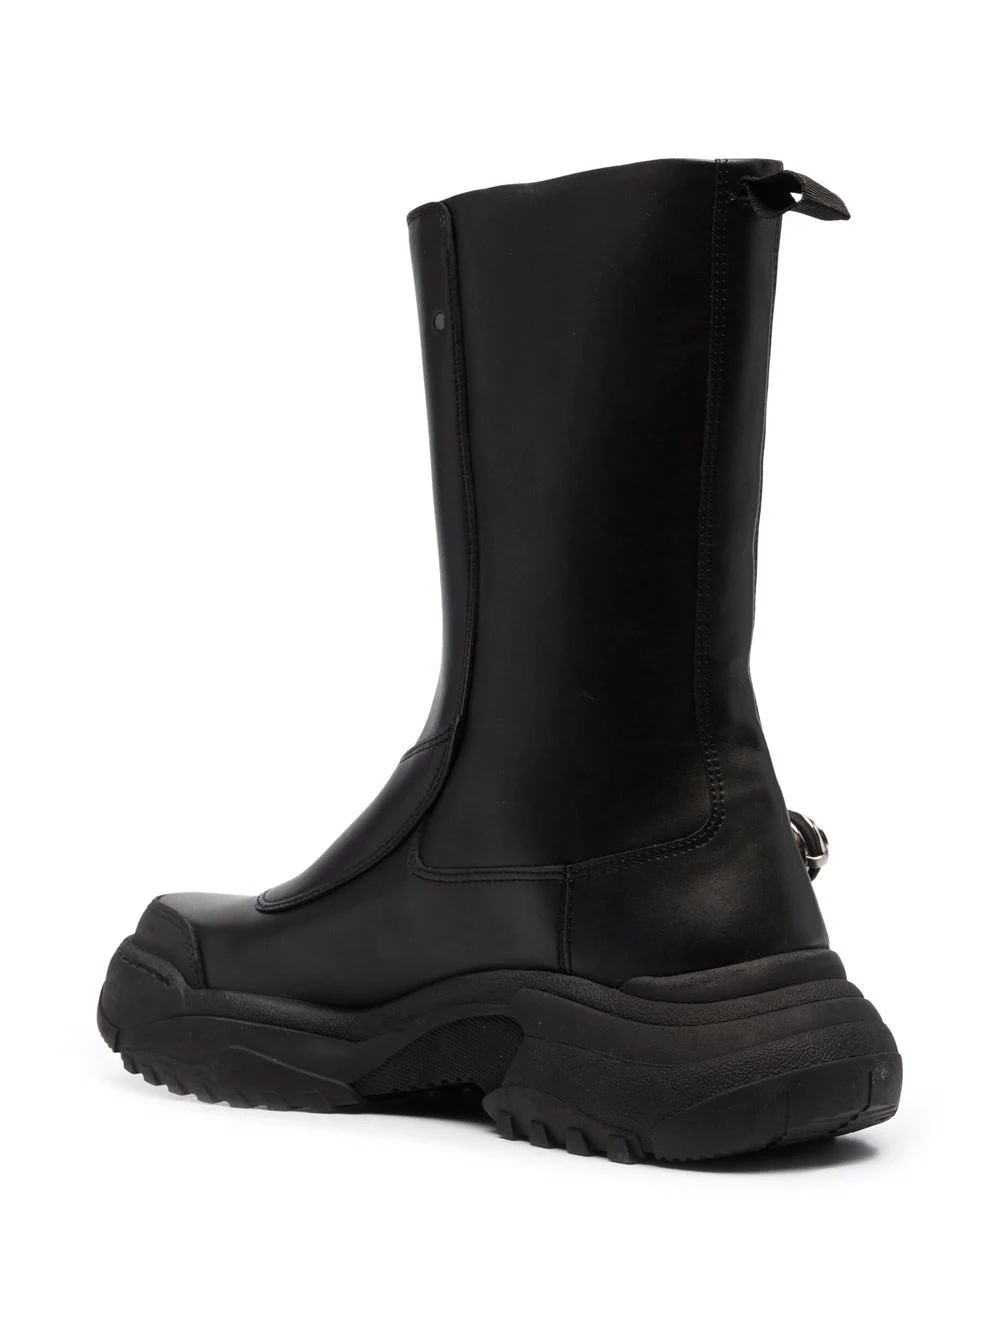 high top workwear boots - 3